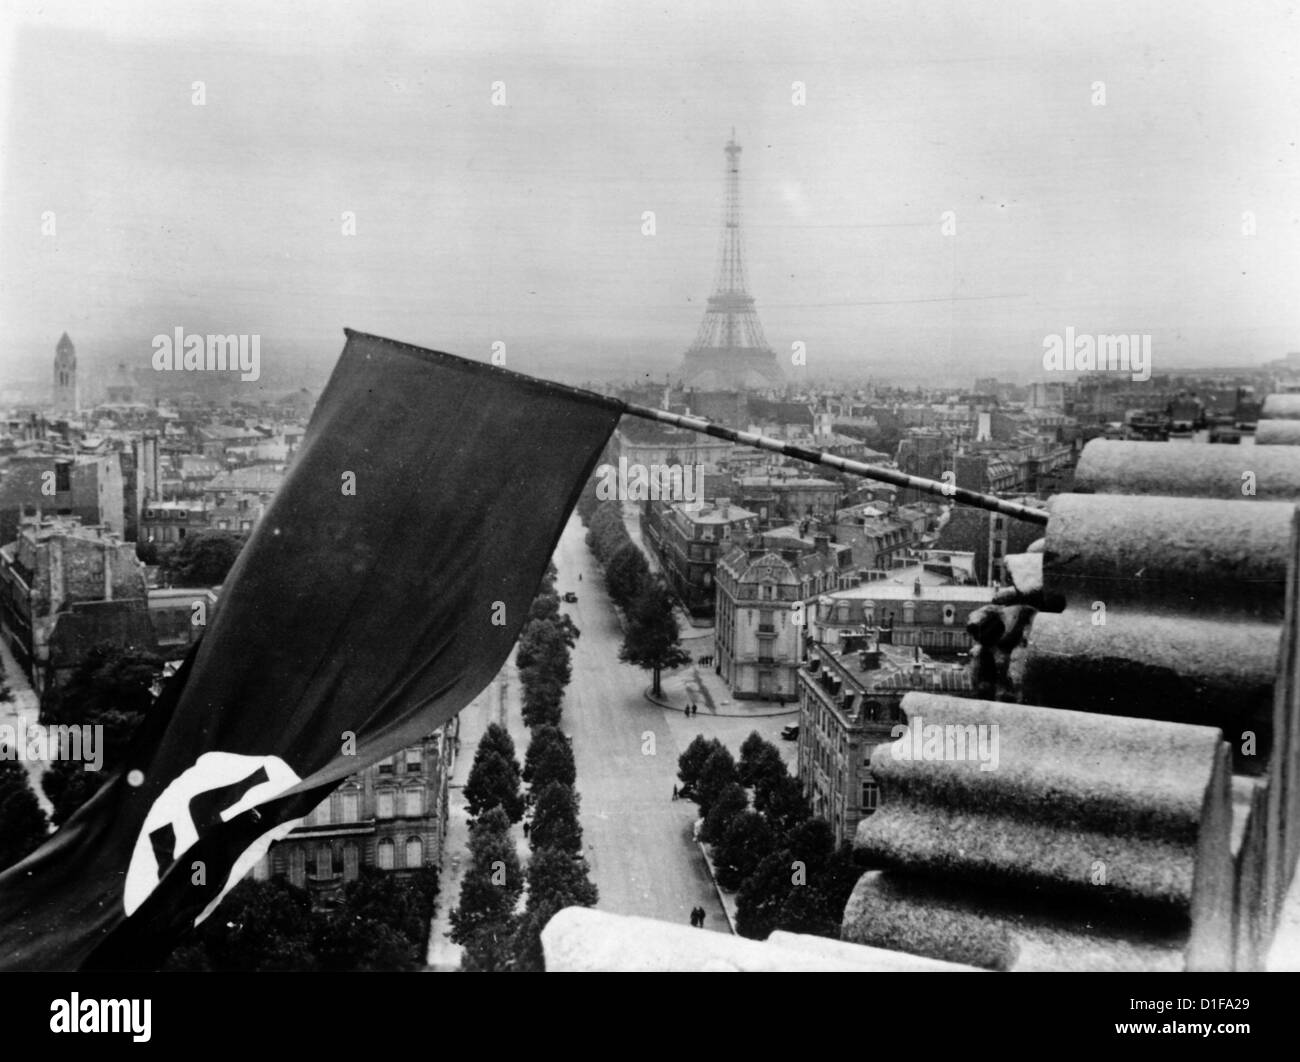 A swastika flag is put up on the Arc de Triomphe upon the invasion of Paris by German troops in June 1940. Fotoarchiv für Zeitgeschichte Stock Photo